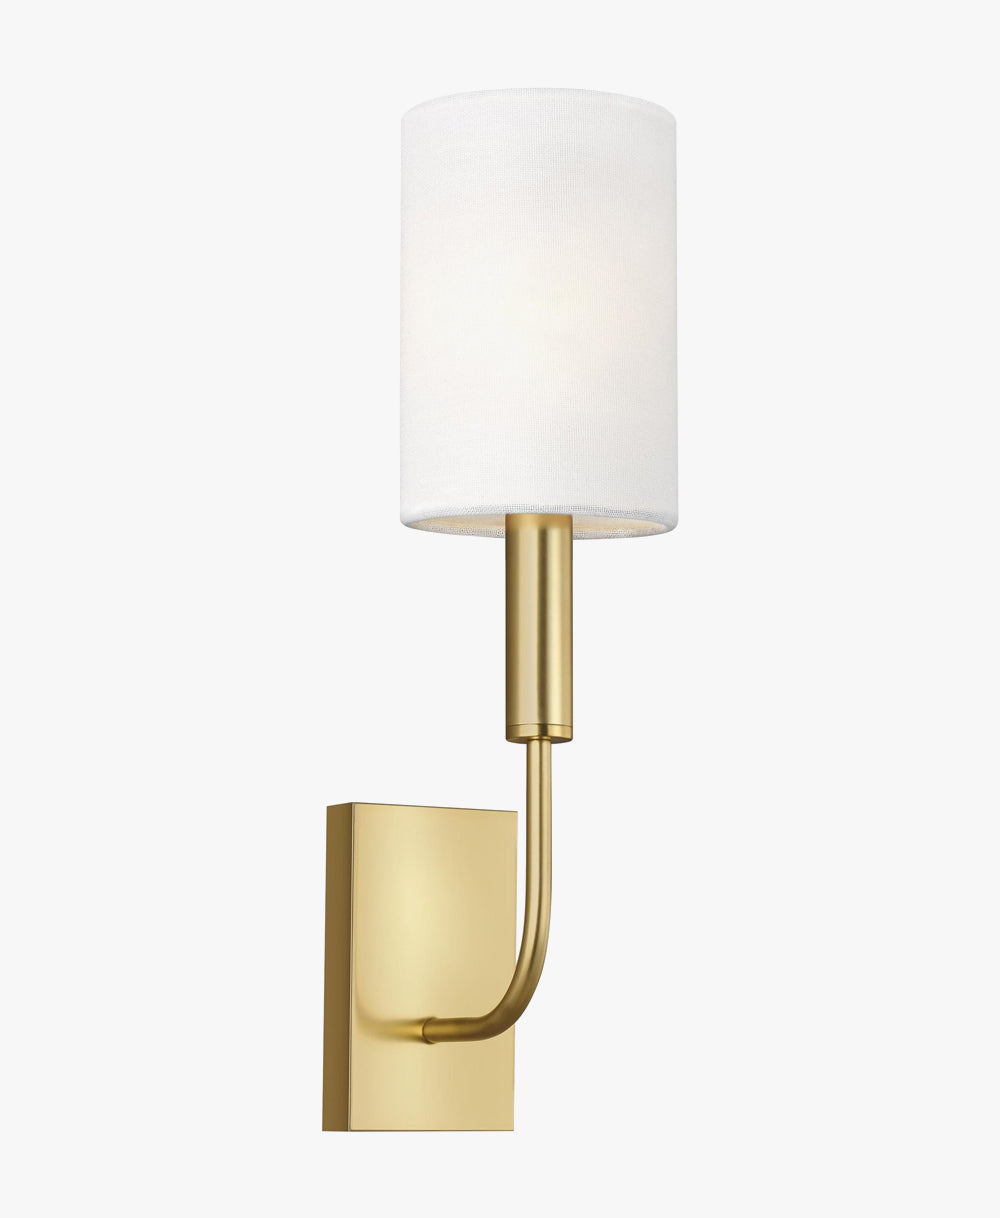 Brianna 1 Wall Sconce - Burnished Brass